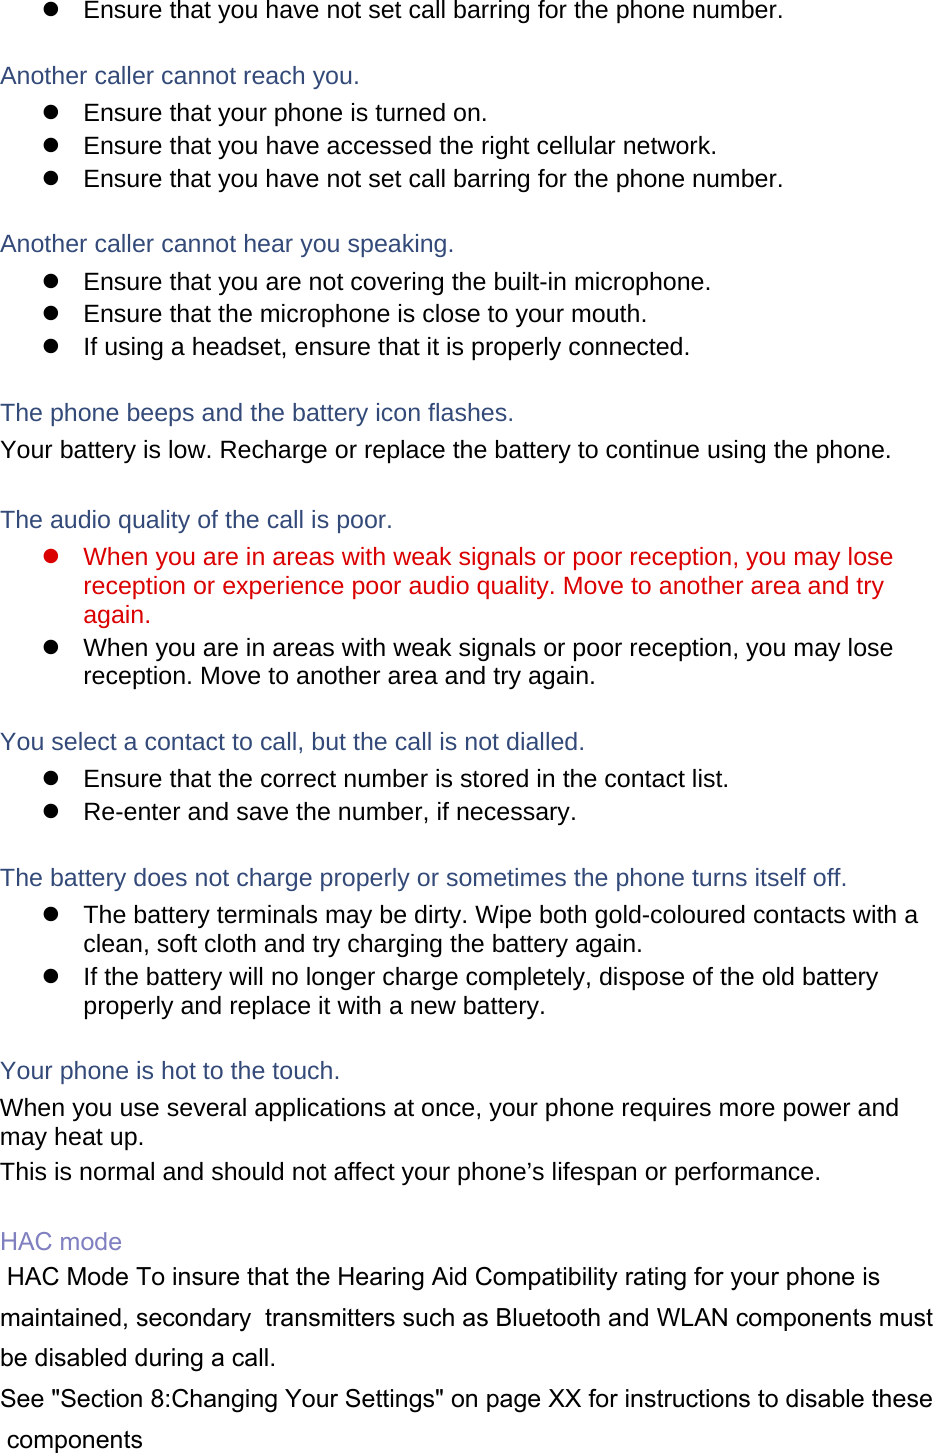   Ensure that you have not set call barring for the phone number.  Another caller cannot reach you.   Ensure that your phone is turned on.   Ensure that you have accessed the right cellular network.   Ensure that you have not set call barring for the phone number.  Another caller cannot hear you speaking.   Ensure that you are not covering the built-in microphone.   Ensure that the microphone is close to your mouth.   If using a headset, ensure that it is properly connected.  The phone beeps and the battery icon flashes. Your battery is low. Recharge or replace the battery to continue using the phone.  The audio quality of the call is poor.   When you are in areas with weak signals or poor reception, you may lose reception or experience poor audio quality. Move to another area and try again.   When you are in areas with weak signals or poor reception, you may lose reception. Move to another area and try again.  You select a contact to call, but the call is not dialled.   Ensure that the correct number is stored in the contact list.   Re-enter and save the number, if necessary.  The battery does not charge properly or sometimes the phone turns itself off.   The battery terminals may be dirty. Wipe both gold-coloured contacts with a clean, soft cloth and try charging the battery again.   If the battery will no longer charge completely, dispose of the old battery properly and replace it with a new battery.  Your phone is hot to the touch. When you use several applications at once, your phone requires more power and may heat up. This is normal and should not affect your phone’s lifespan or performance.  HAC mode HAC Mode To insure that the Hearing Aid Compatibility rating for your phone is maintained, secondary  transmitters such as Bluetooth and WLAN components must be disabled during a call.  See &quot;Section 8:Changing Your Settings&quot; on page XX for instructions to disable these components   